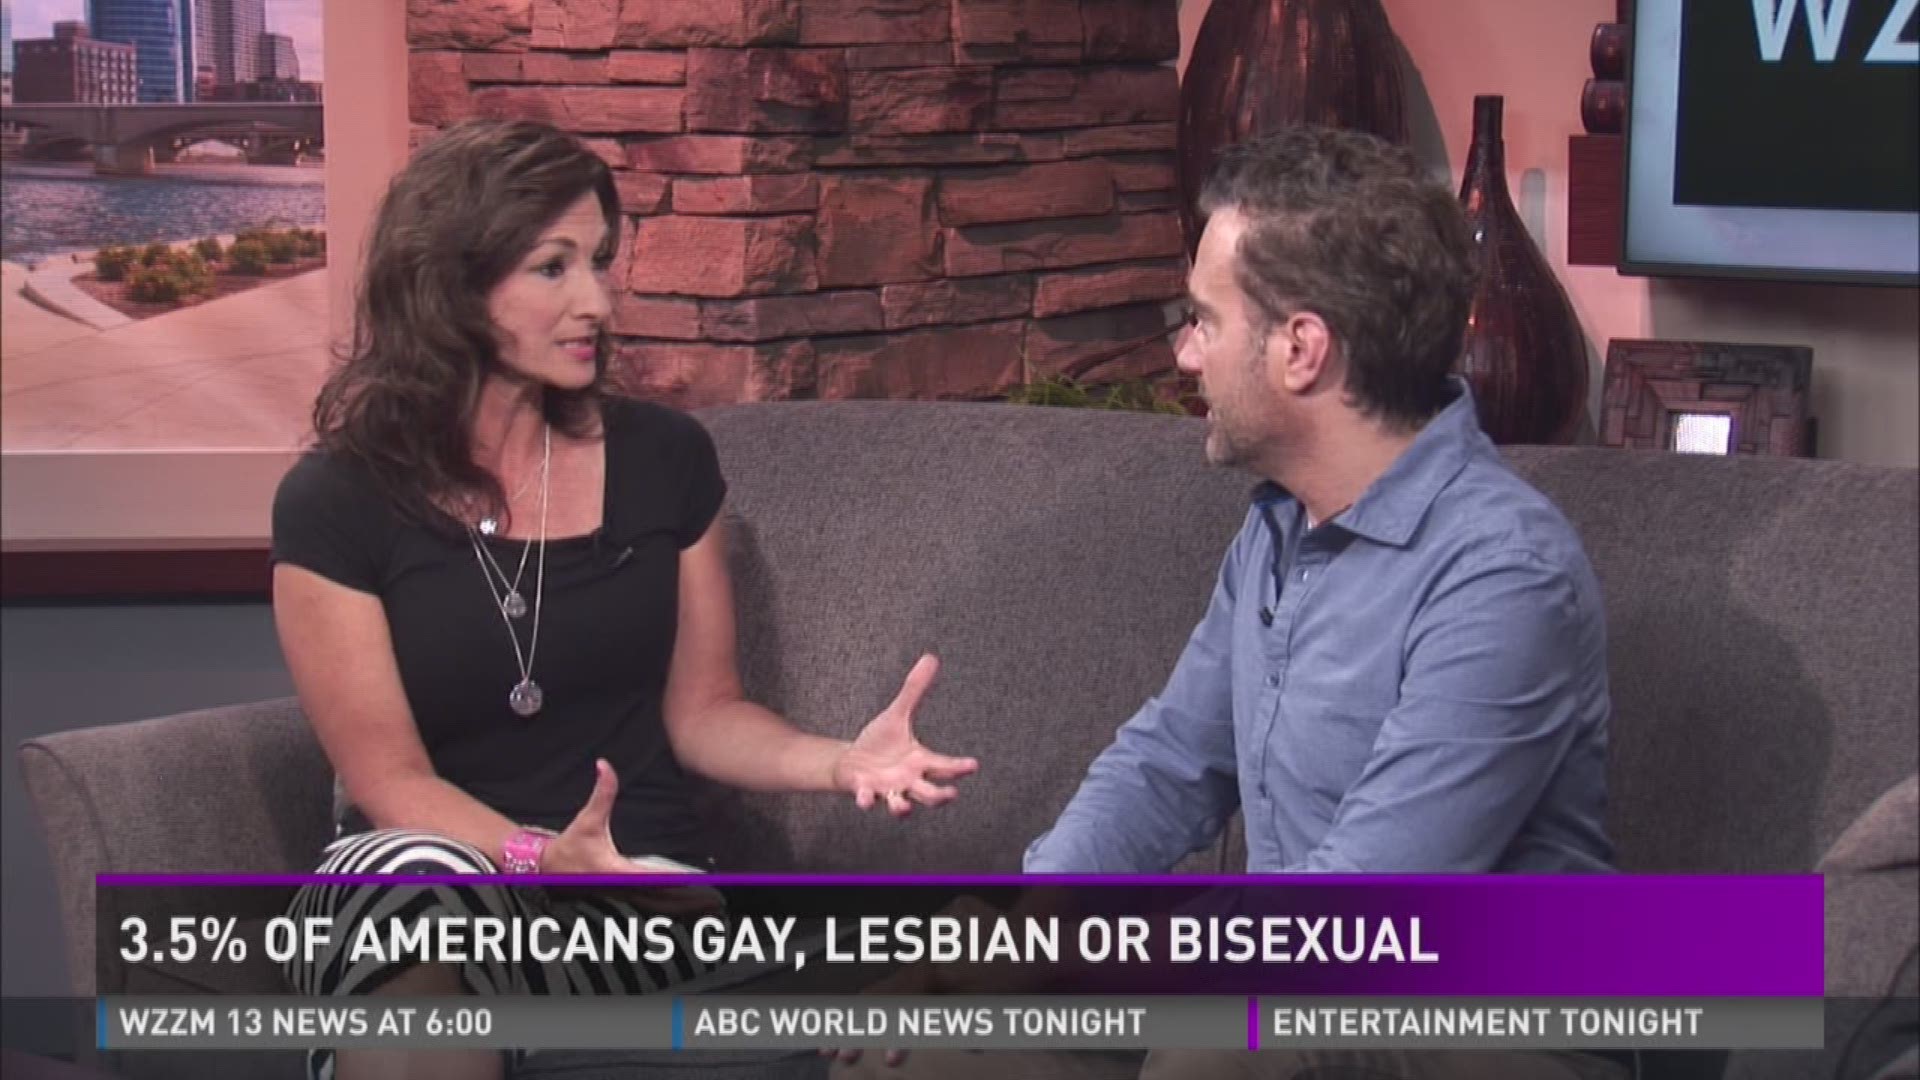 Dr. Matt Clark, a psychologist with the Clark Institute in Grand Rapids, joined WZZM to discuss the topic of sexuality.